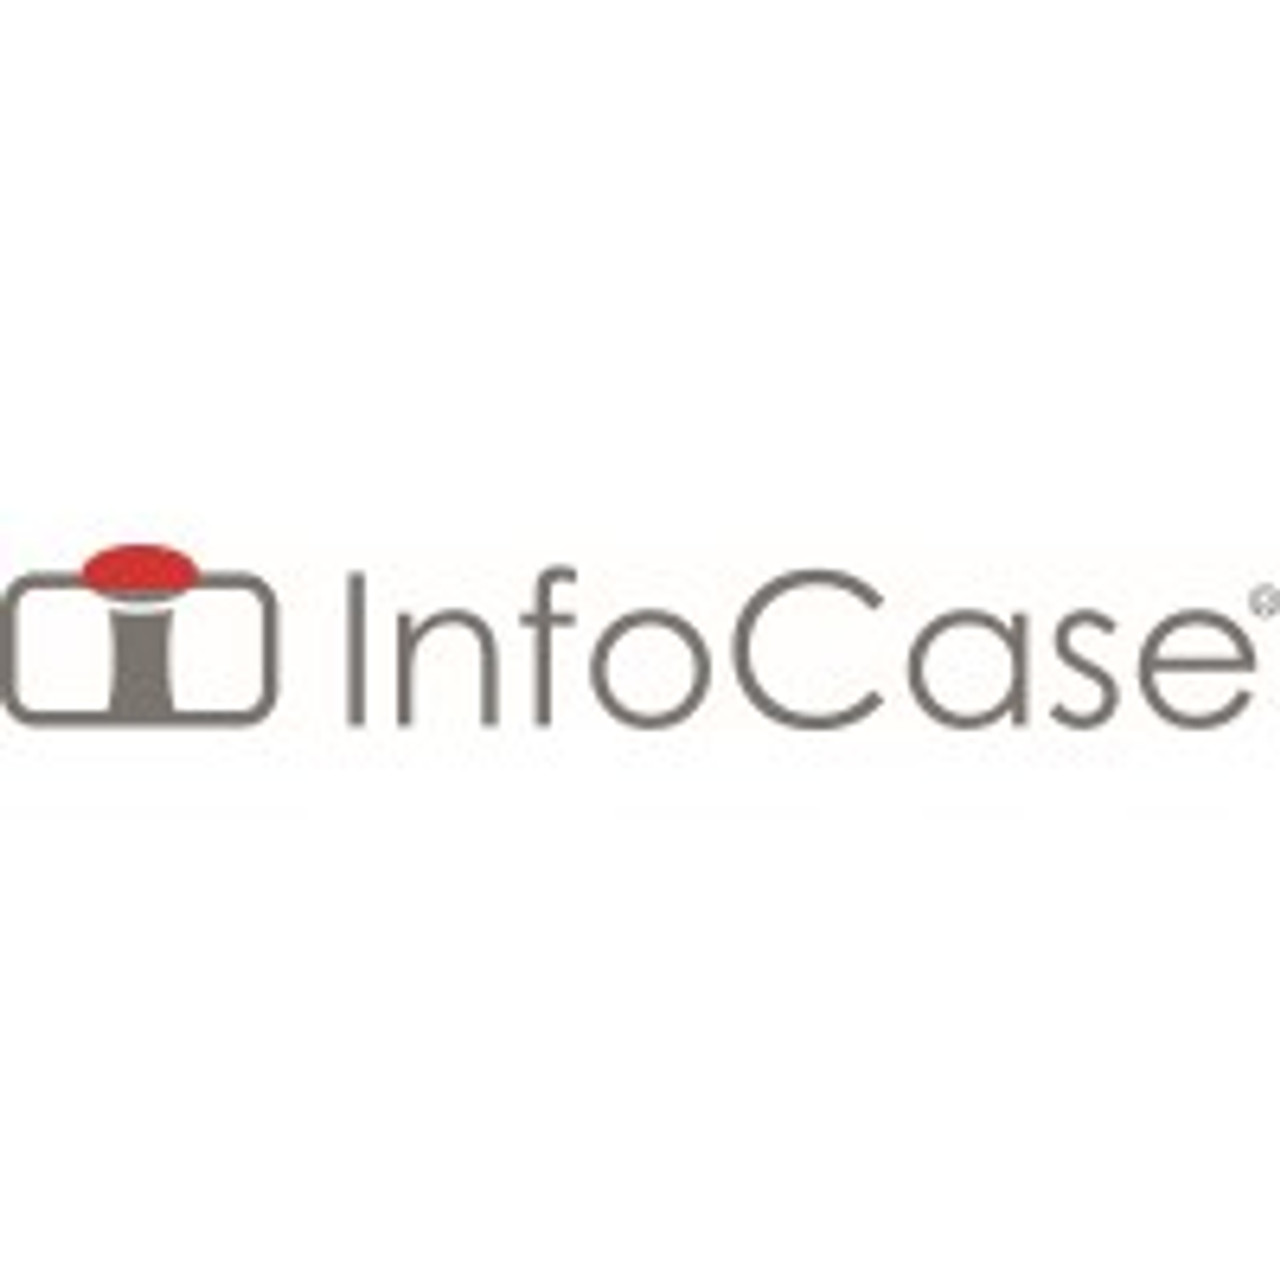 Infocase Always-On Snap Case for the Lenovo 500e.Air cell cushioned corners,Port access,Light weight &protected in all viewing positions. Clear polycarbonate for viewing asset tags.12 mo LTD warranty. Contact Infocase1-800-248-4844,ext111